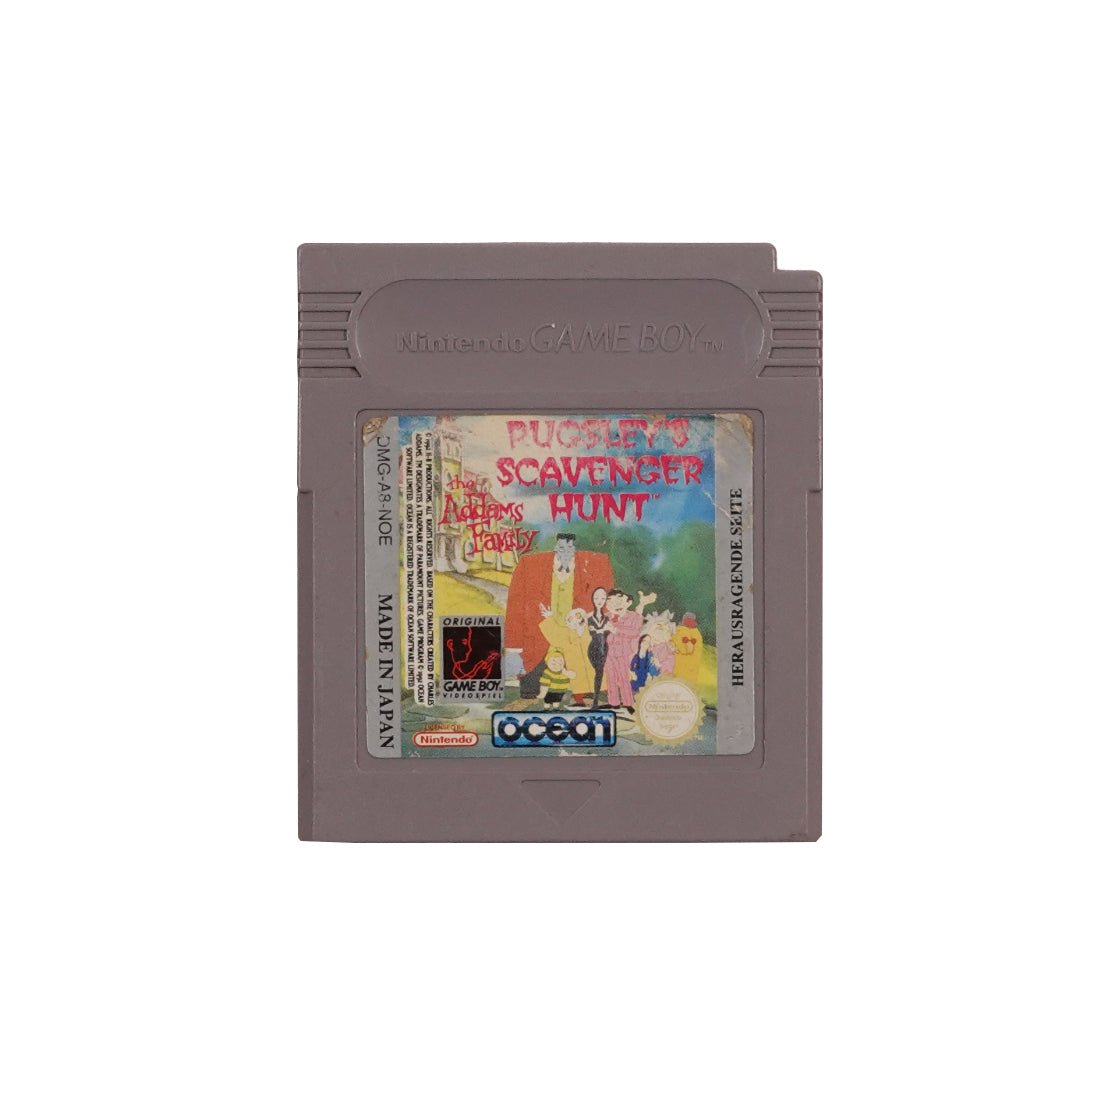 (Pre-Owned) The Adams Family: Pugsley's Scavenger Hunt - Gameboy Classic - Store 974 | ستور ٩٧٤